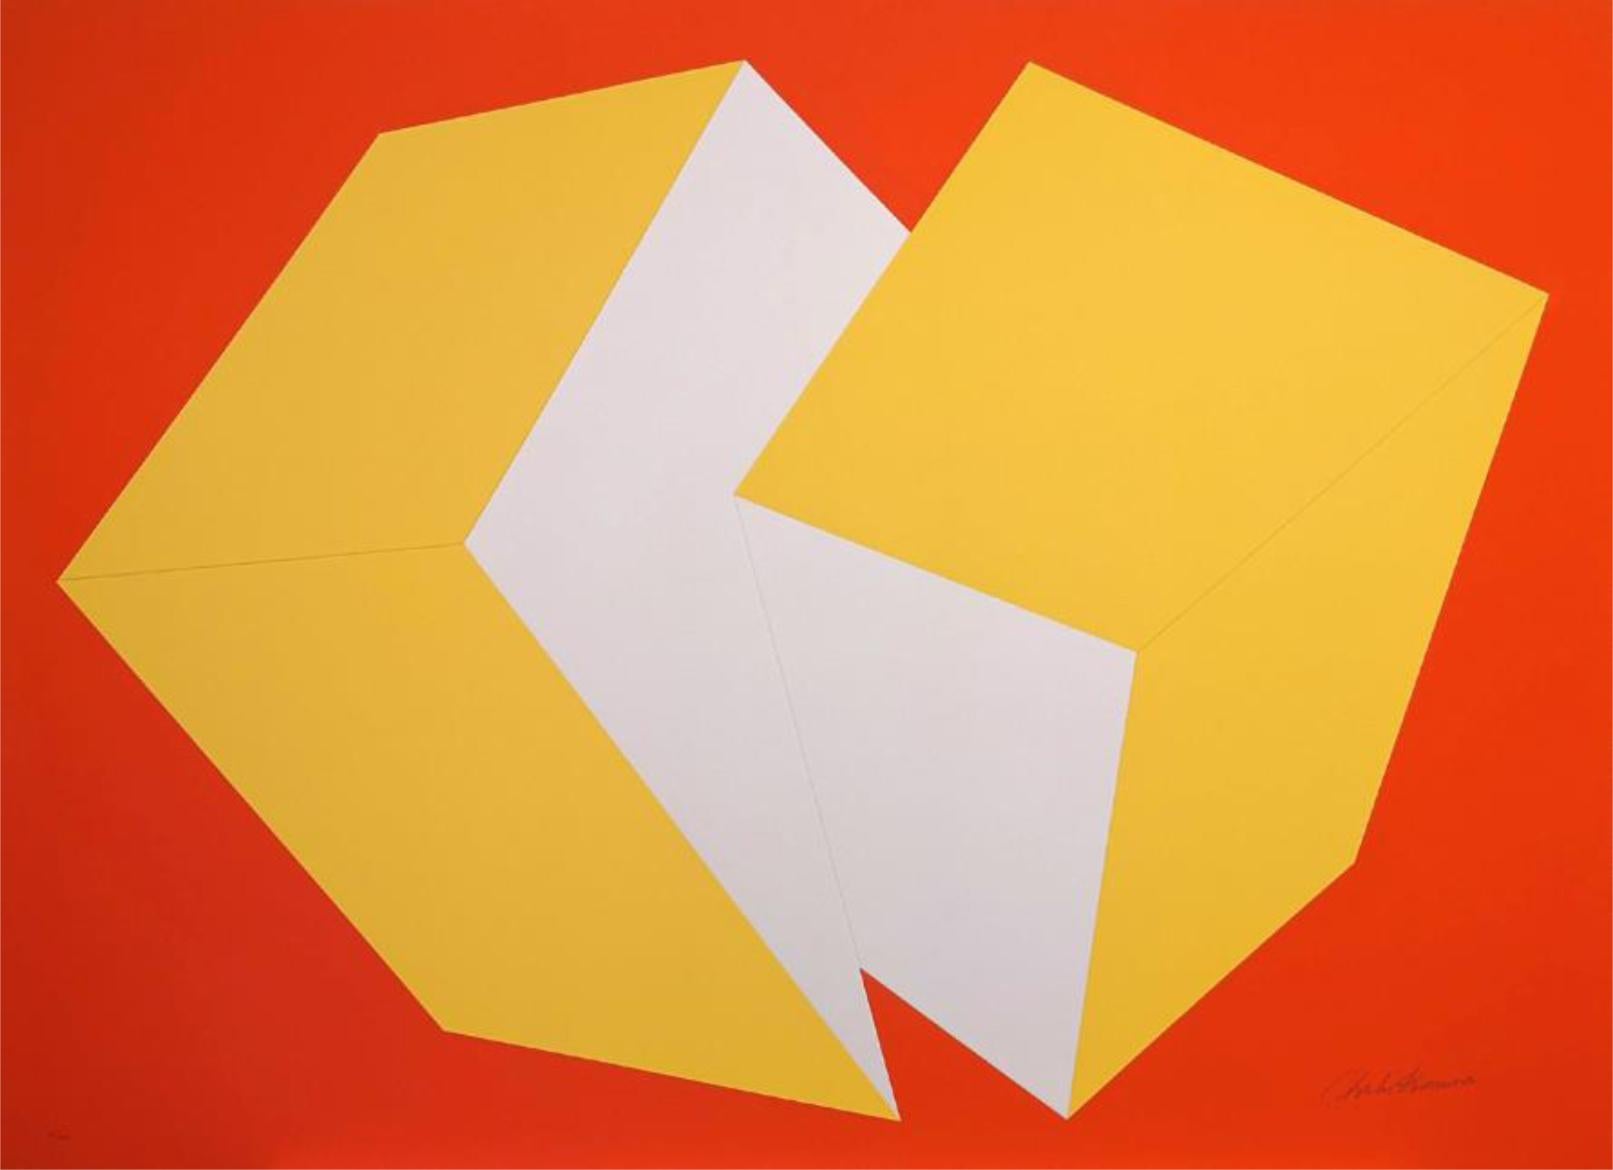 "This work was created with two separate entities that play against each other, in real and illusionary space, thus combining two separate realms that come together and play with one another.” -Charles Hinman

Yellow on Red
Charles Hinman, American